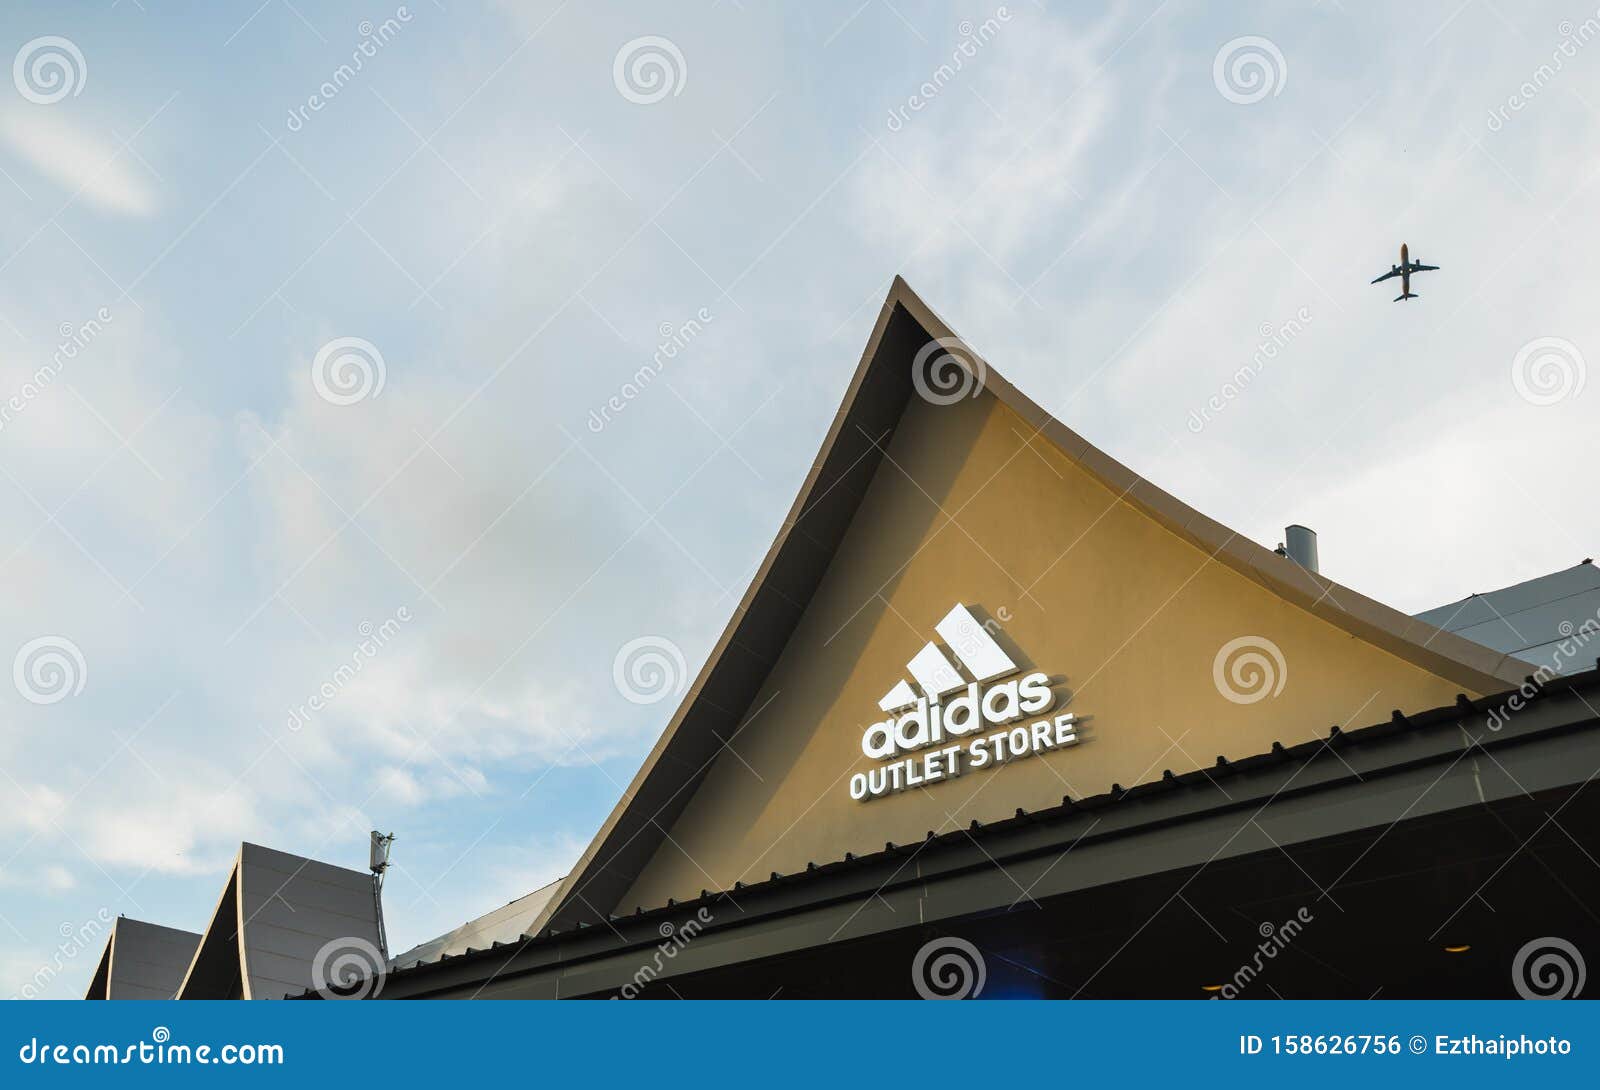 adidas outlet central village